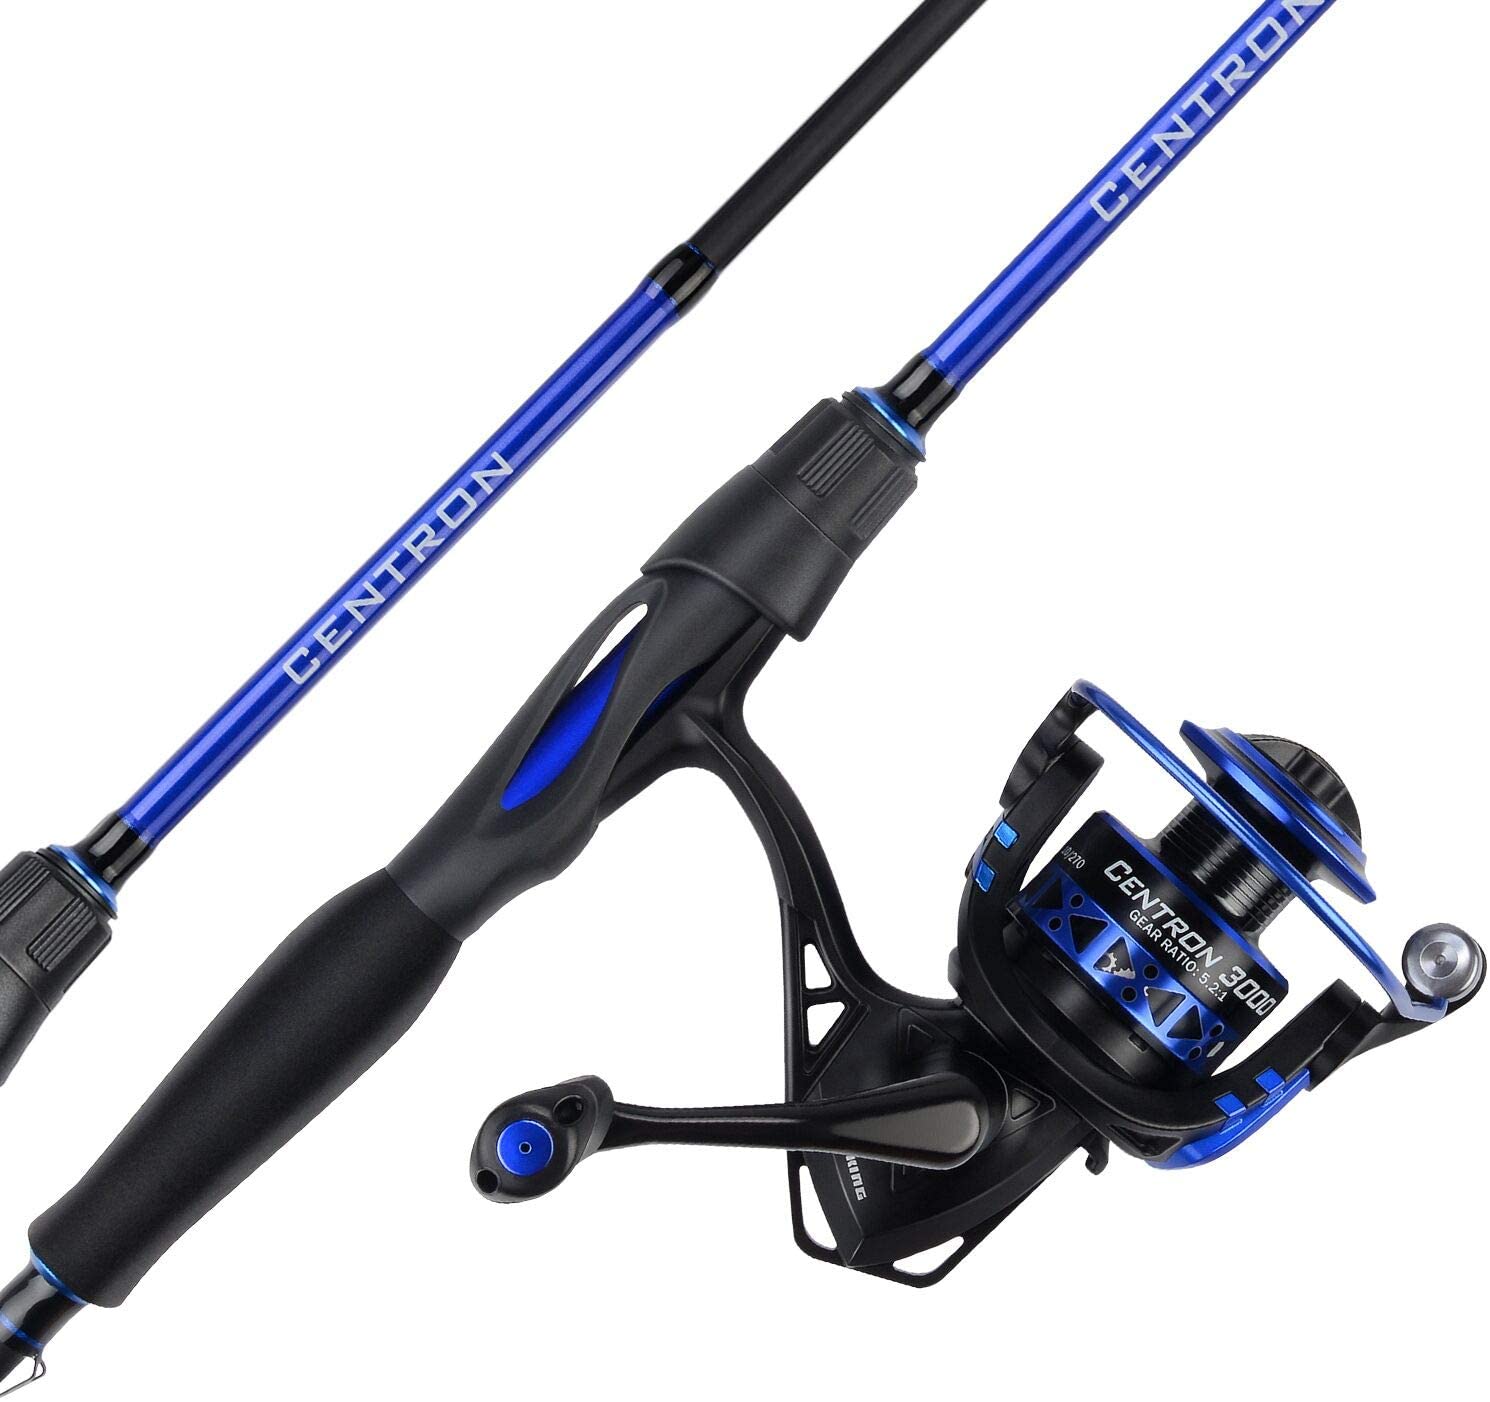 Best Open Face Rod and Reel Combo â Top 10 Recommendations! - EatThatFish.com